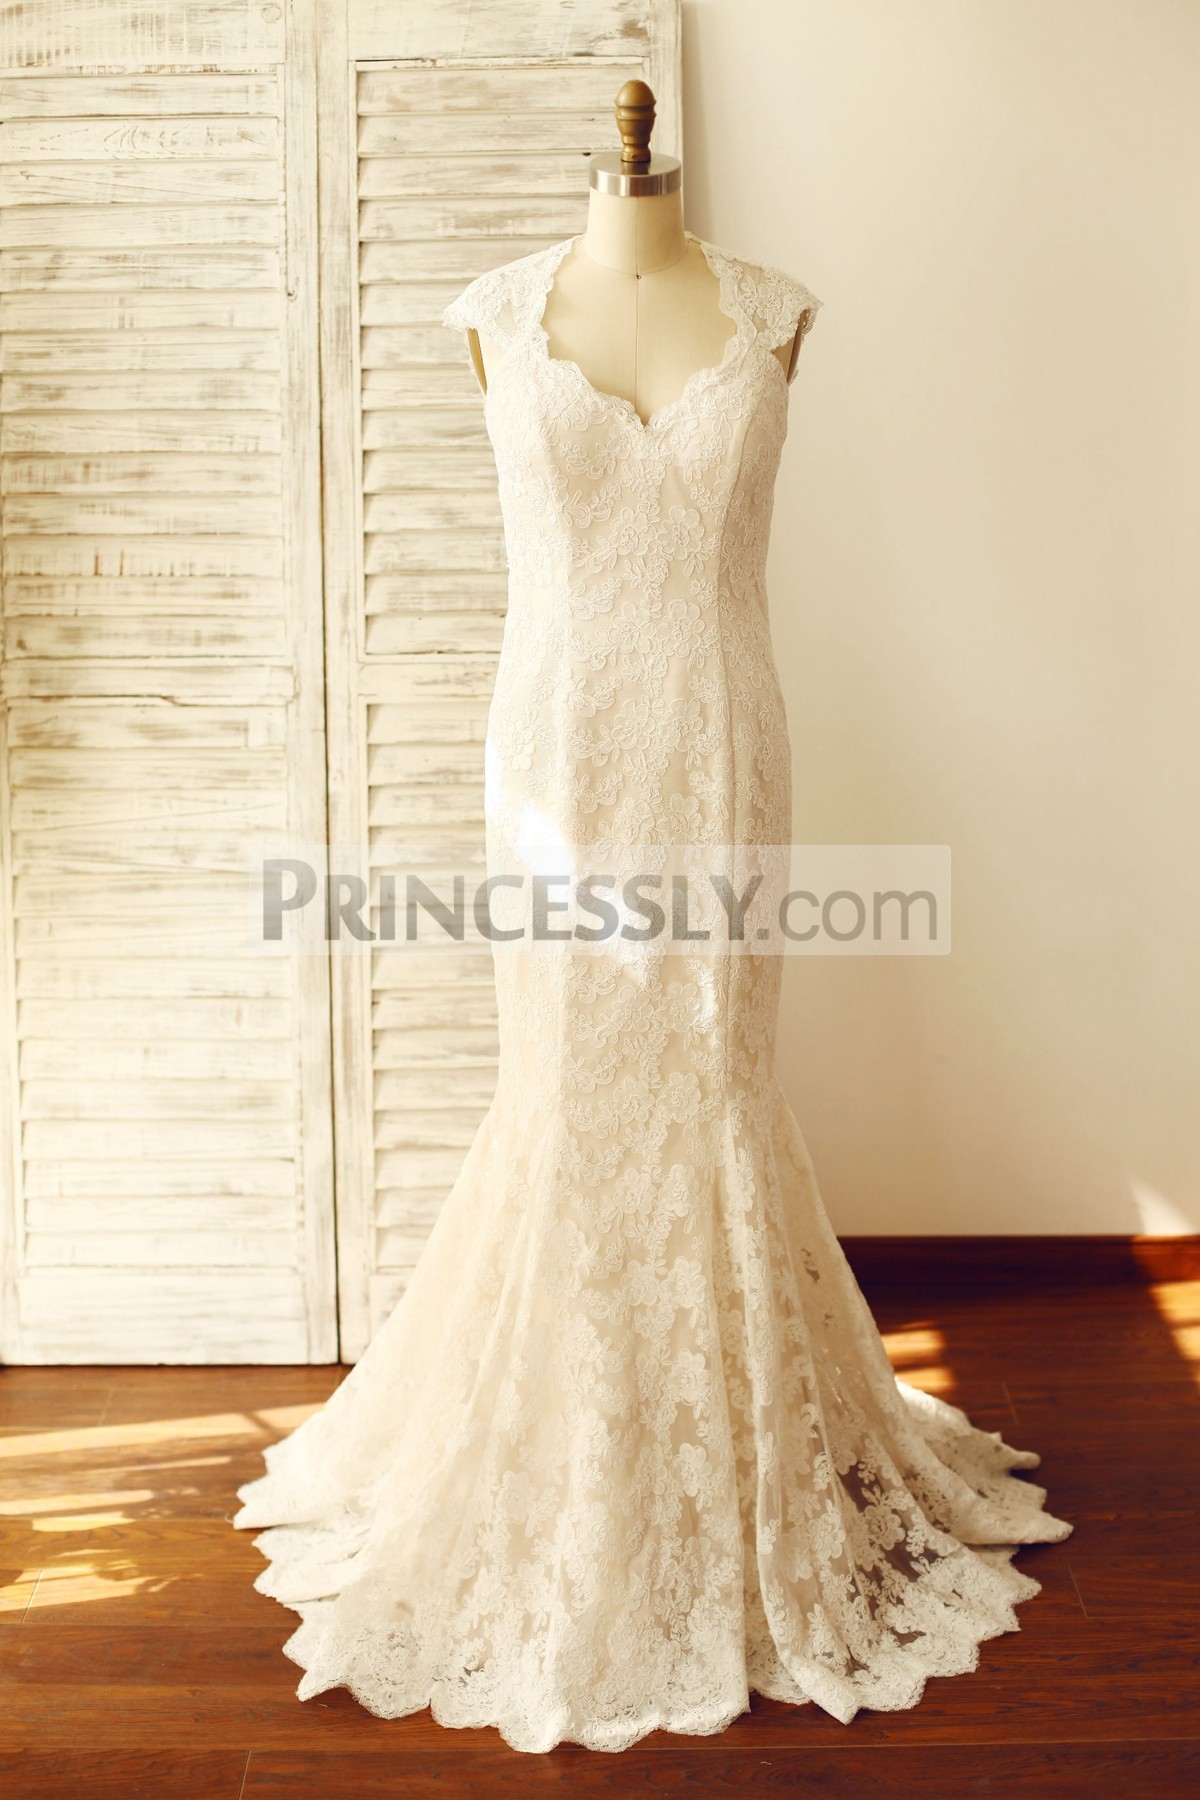 Princessly.com-K1000103-Mermaid Lace Keyhole Wedding Dress with cap sleeves/Champagne Lining-31